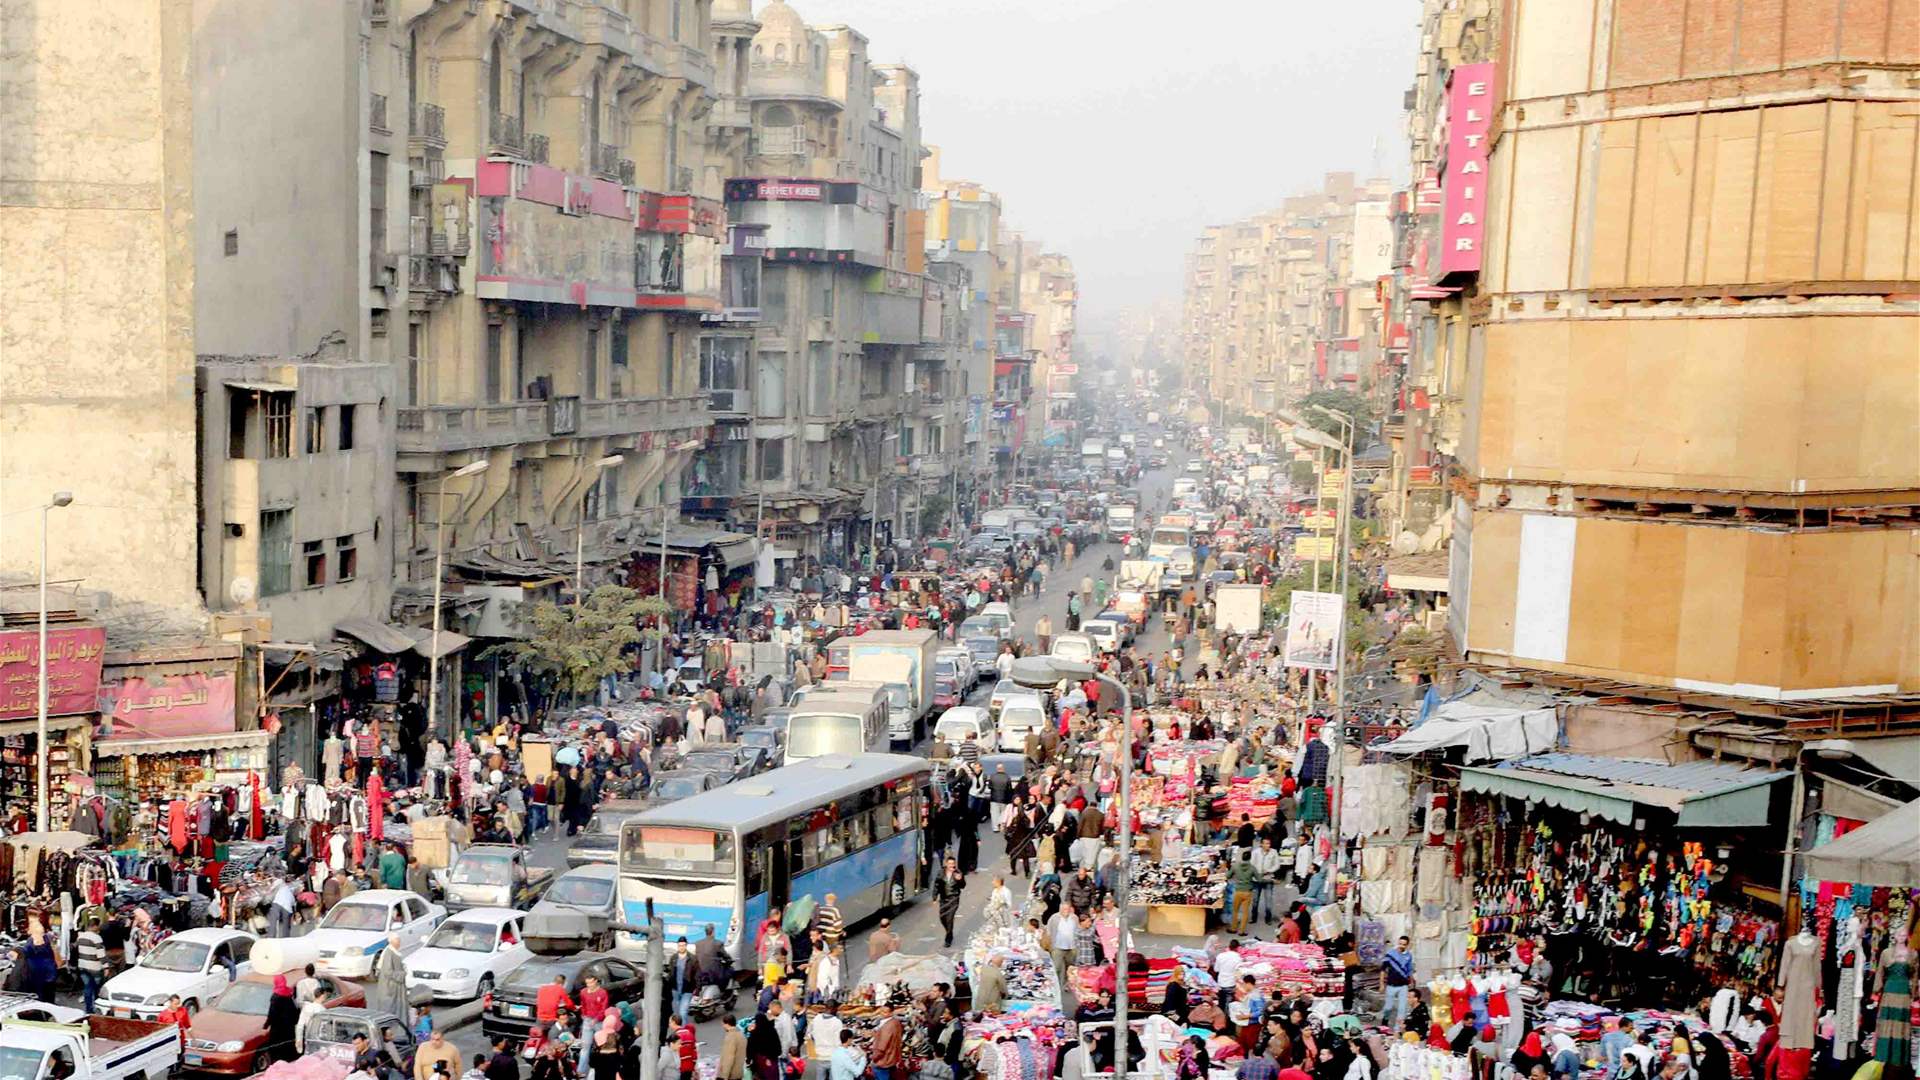 Overpopulation struggles: Egypt contemplates population control policies amid soaring numbers